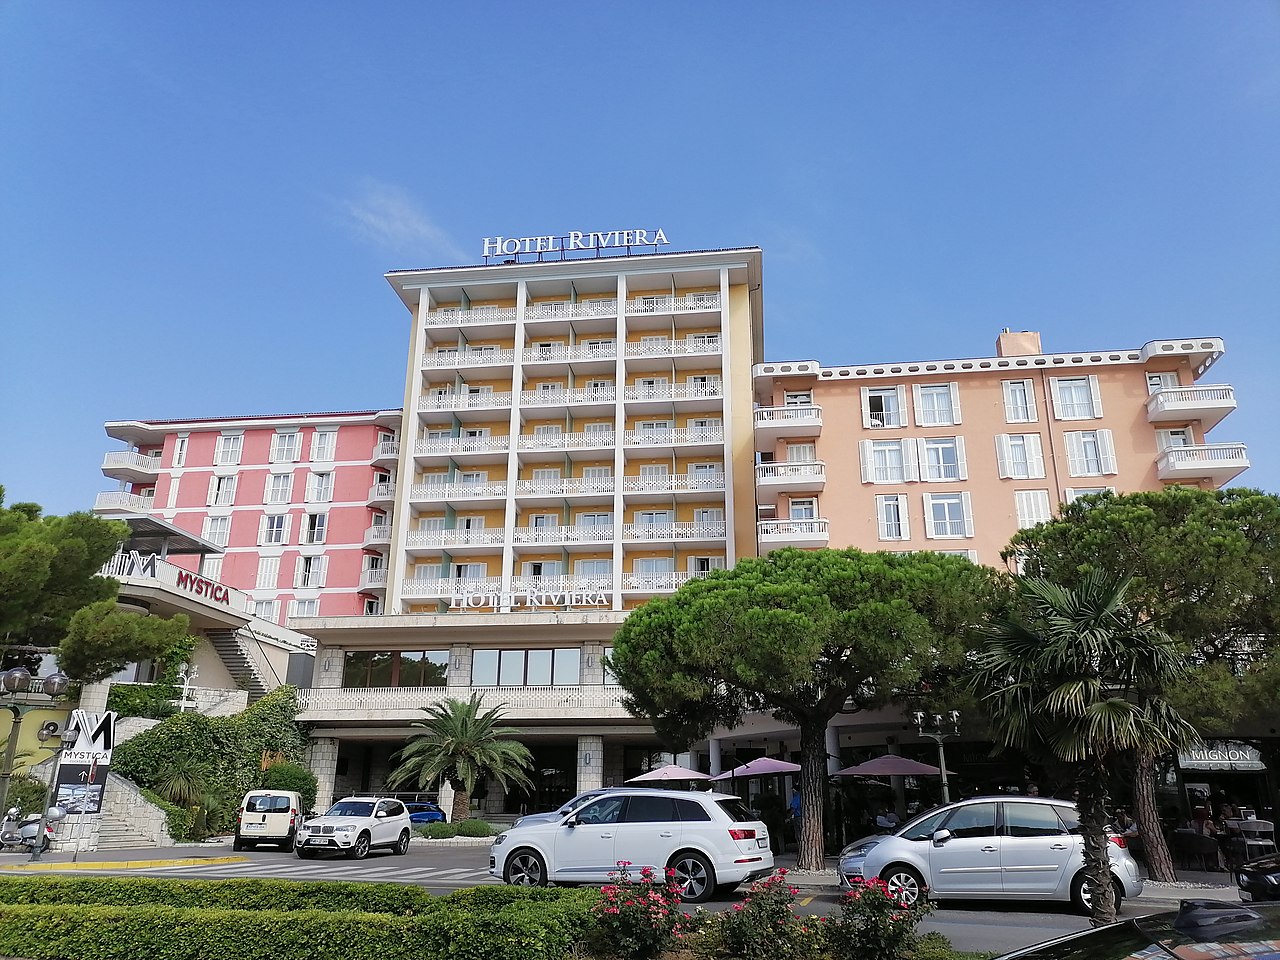 Riviera Hotel Disney - All You Need to Know